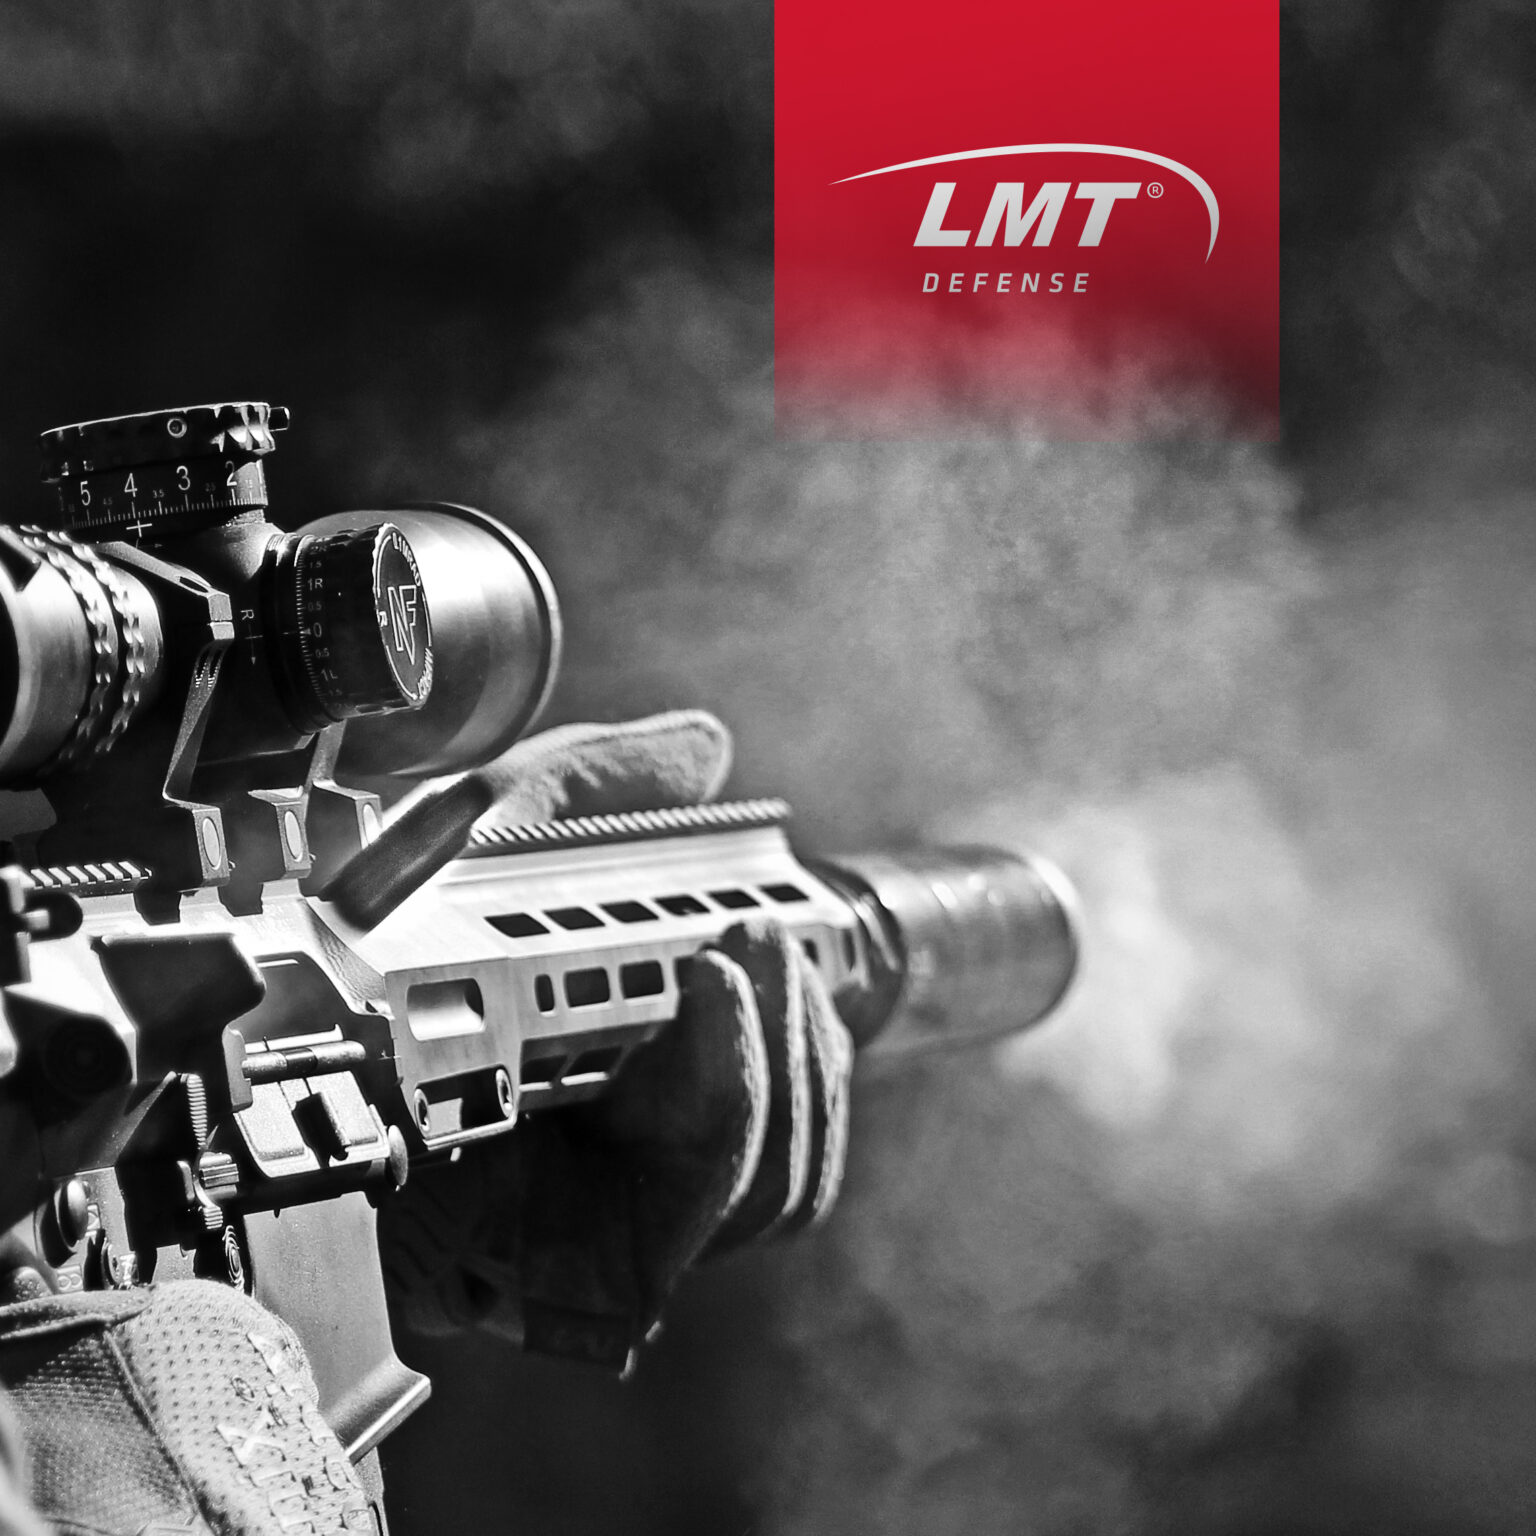 Black and white over-the-should view of man in sunglasses firing a high-powered automatic rifle with LMT Defense logo in the background.